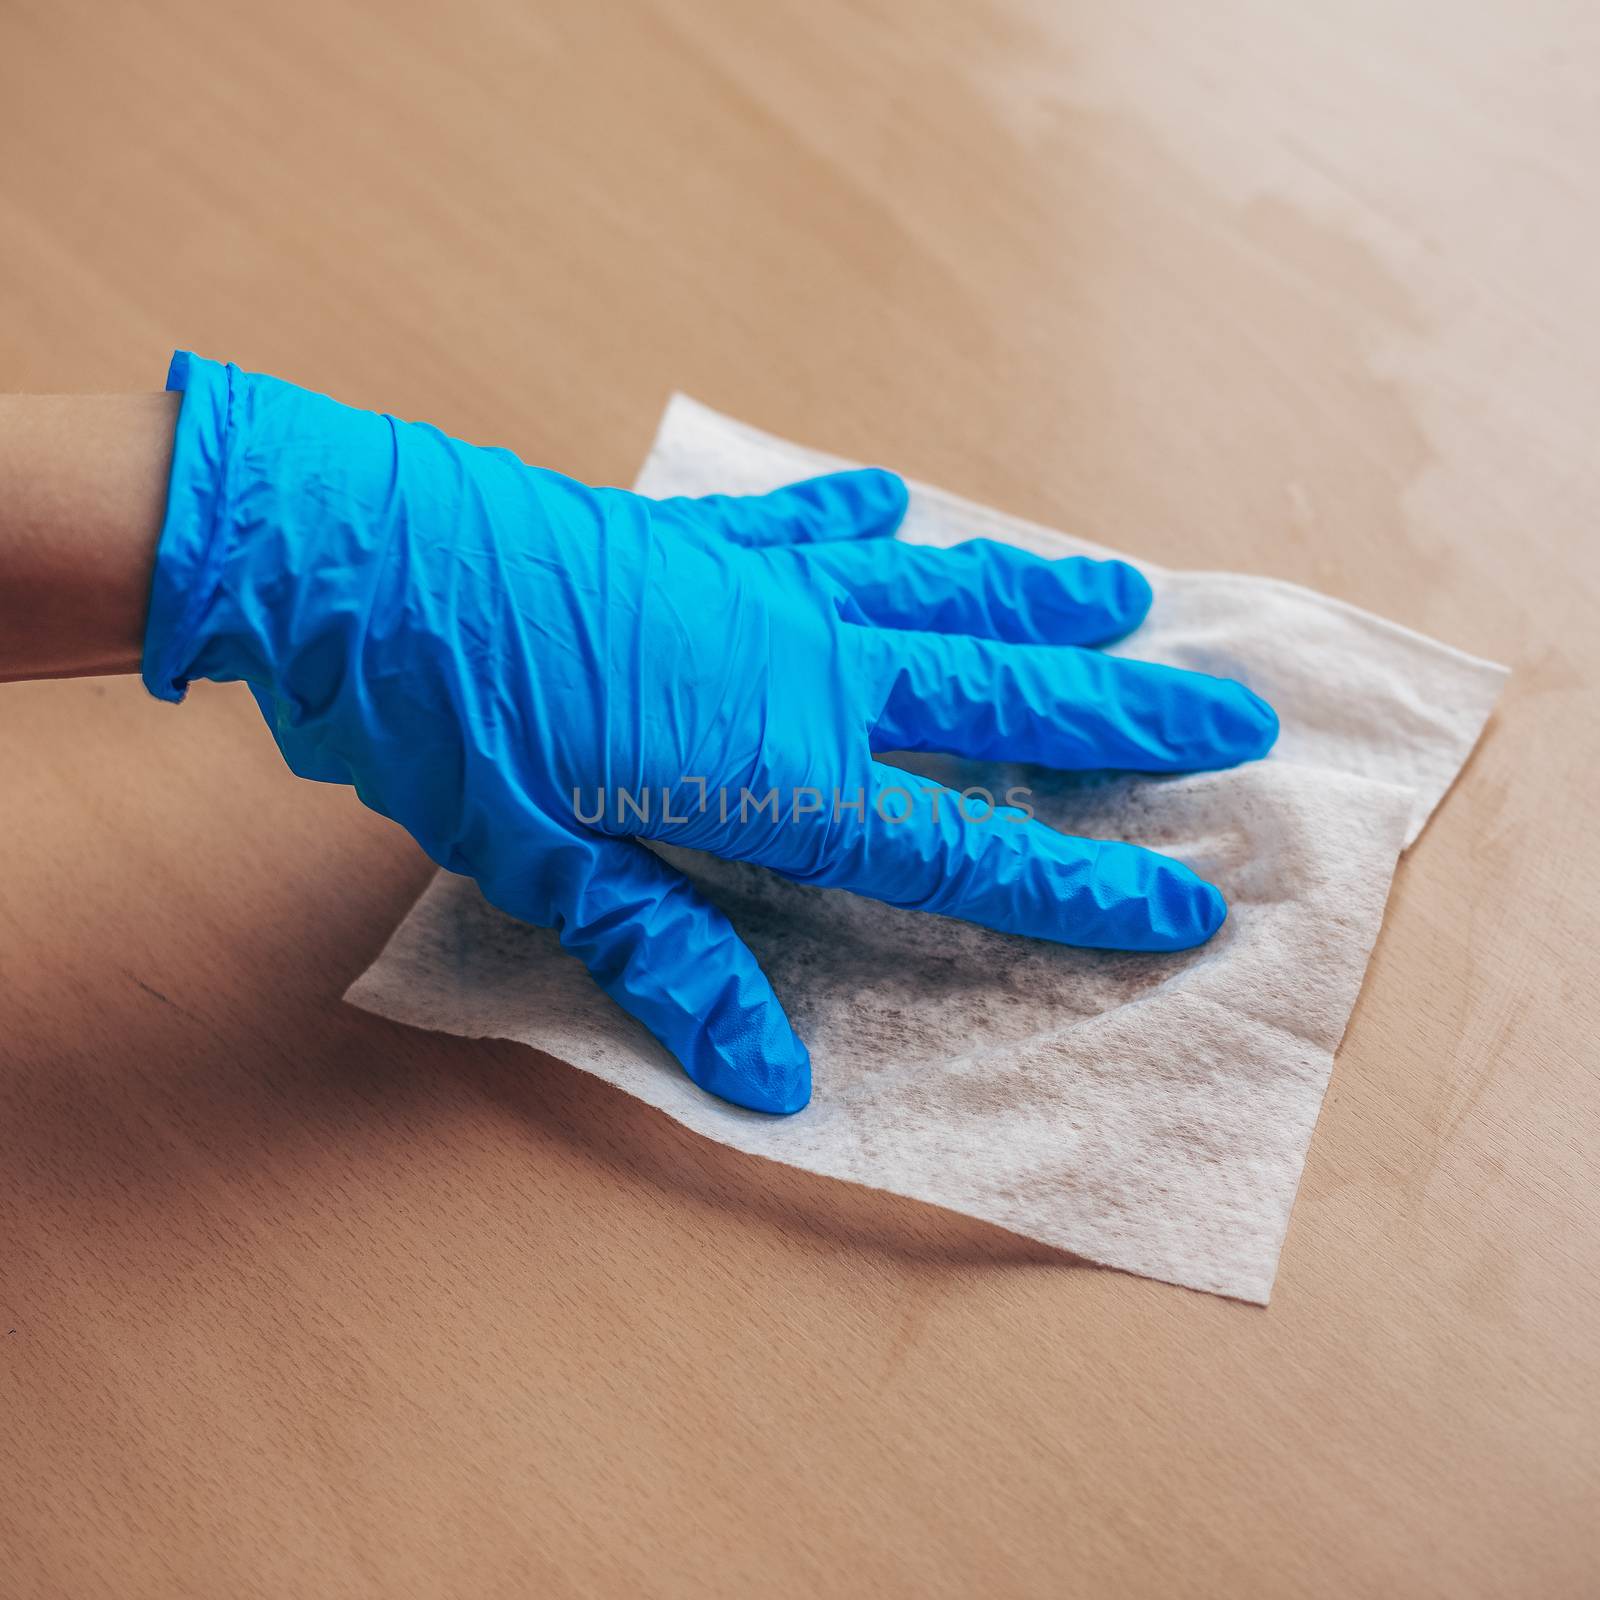 Woman's hand in blue gloves sanitizing cleaning home office wood table surface with wet wipes